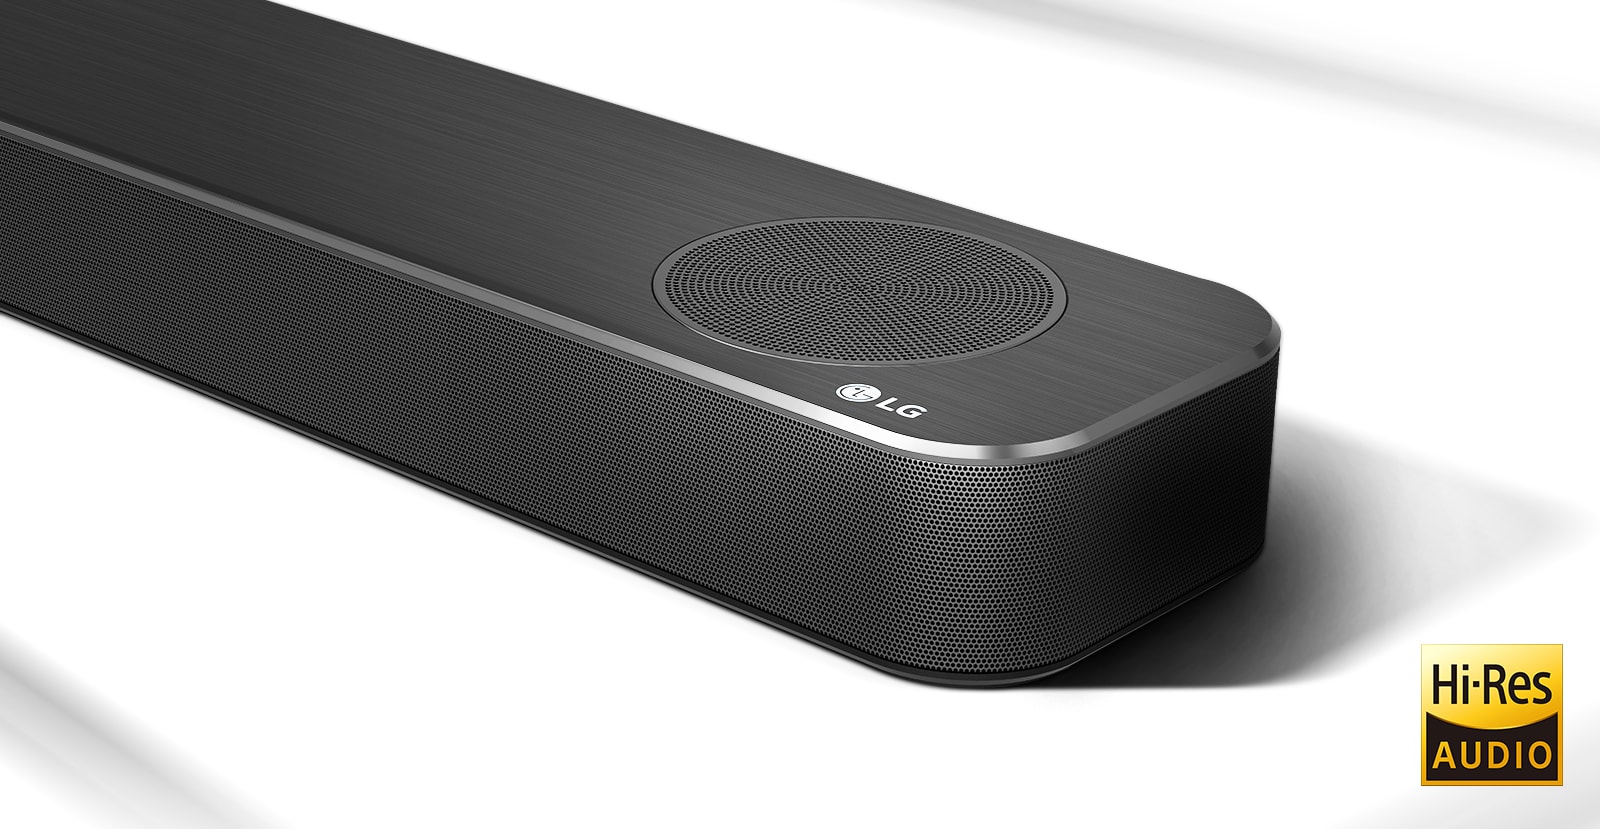 Close-up right side of LG Soundbar with LG logo shown on the bottom right corner. Hi-Res logo is shown below the product. 